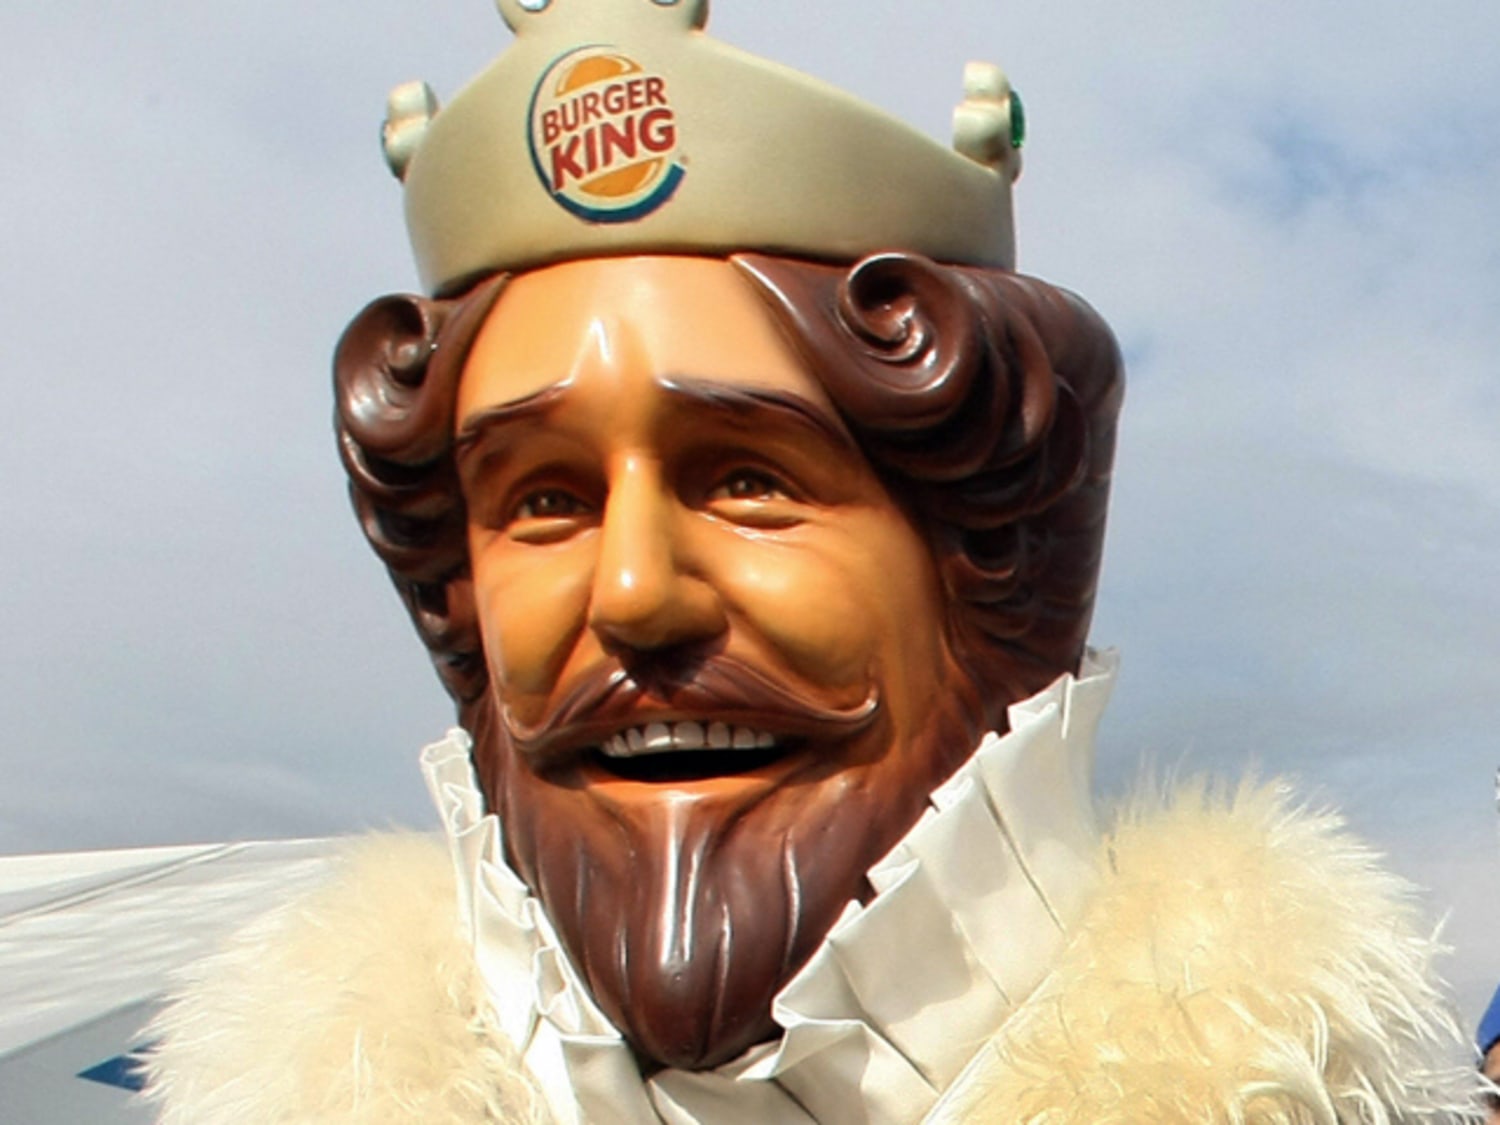 The King is dead  Long live the burger!